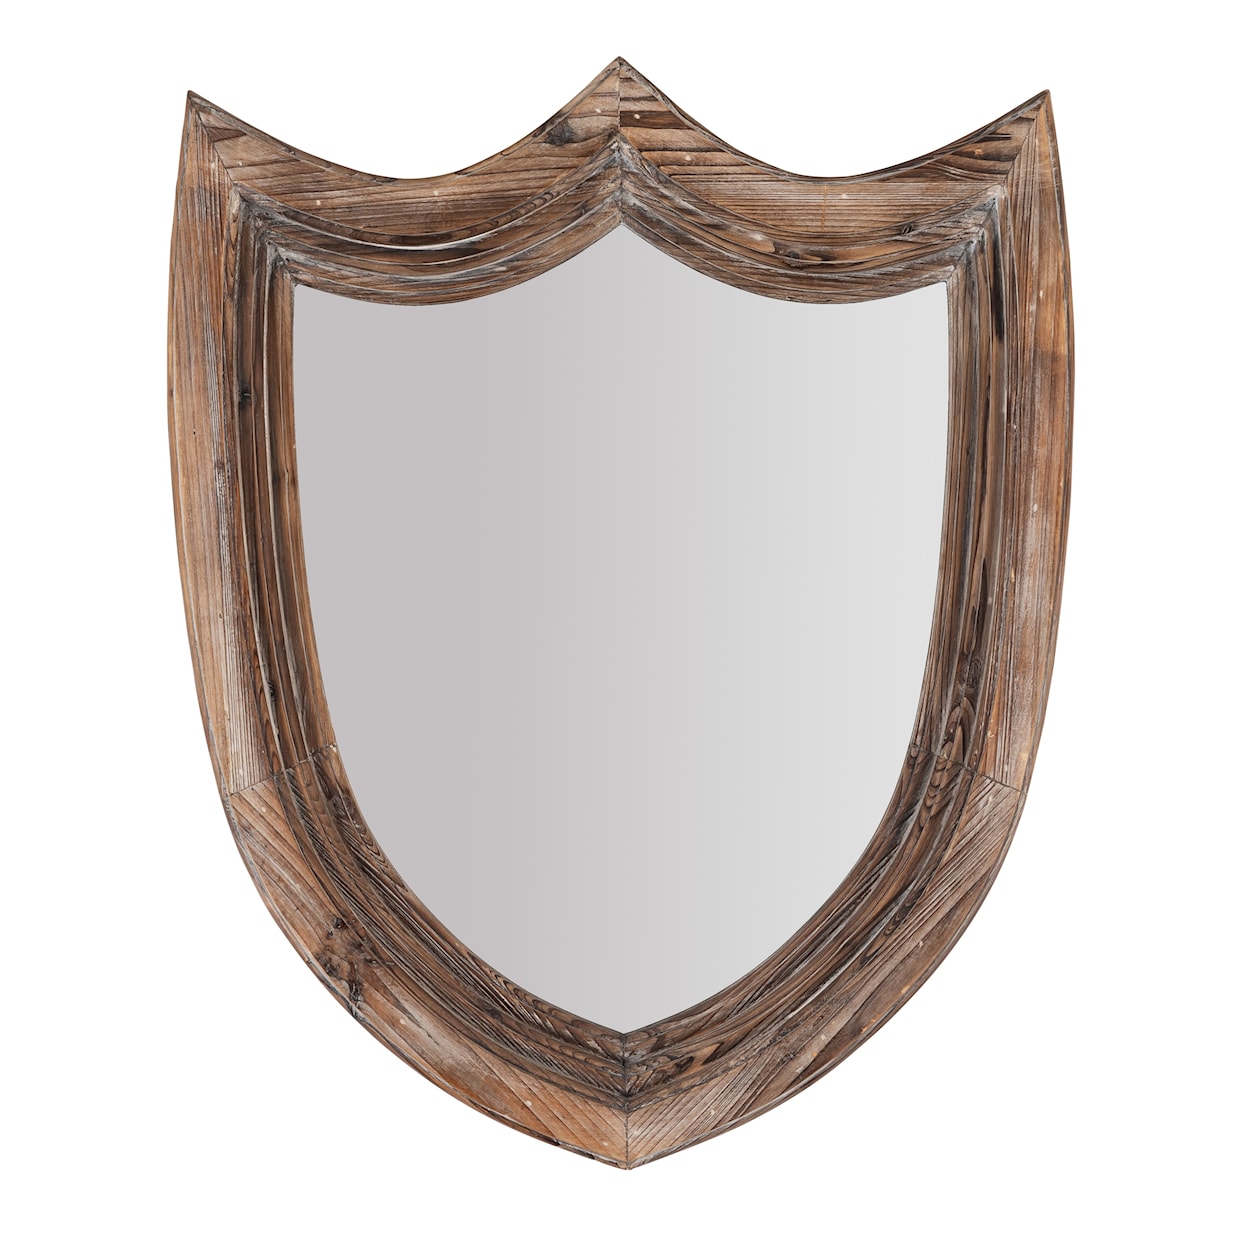 BOBO Intriguing Objects Accessory Distressed Fir Wood Trophy Mirror 1